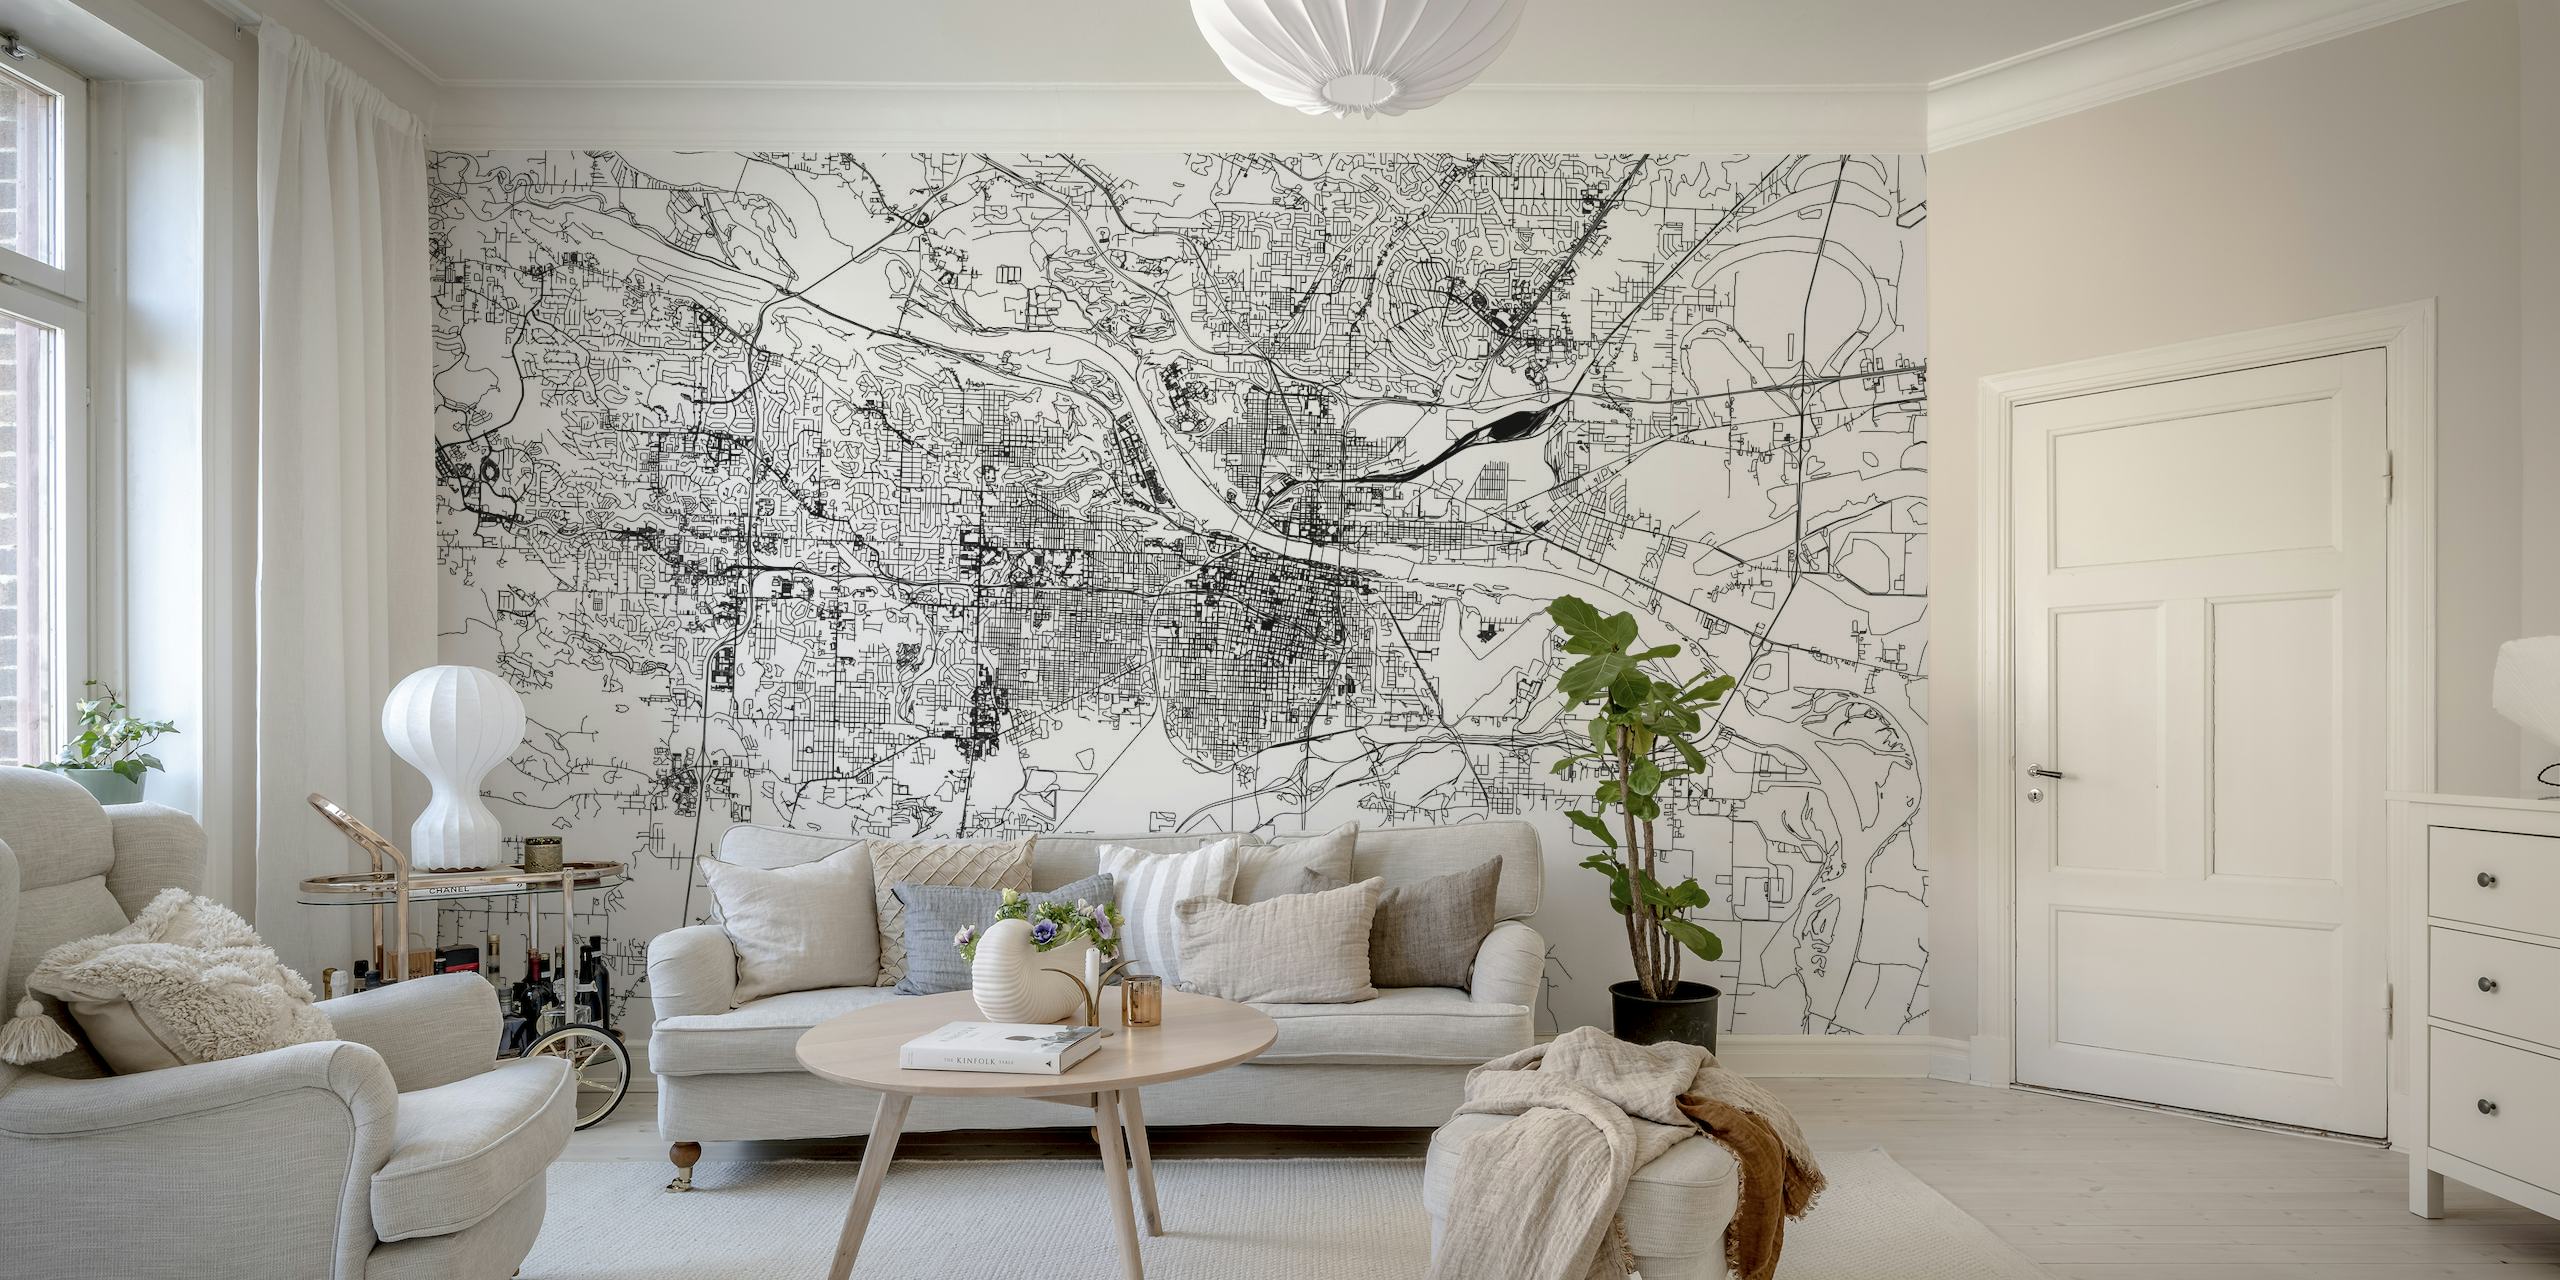 Monochrome wall mural of Little Rock Map with detailed street layout